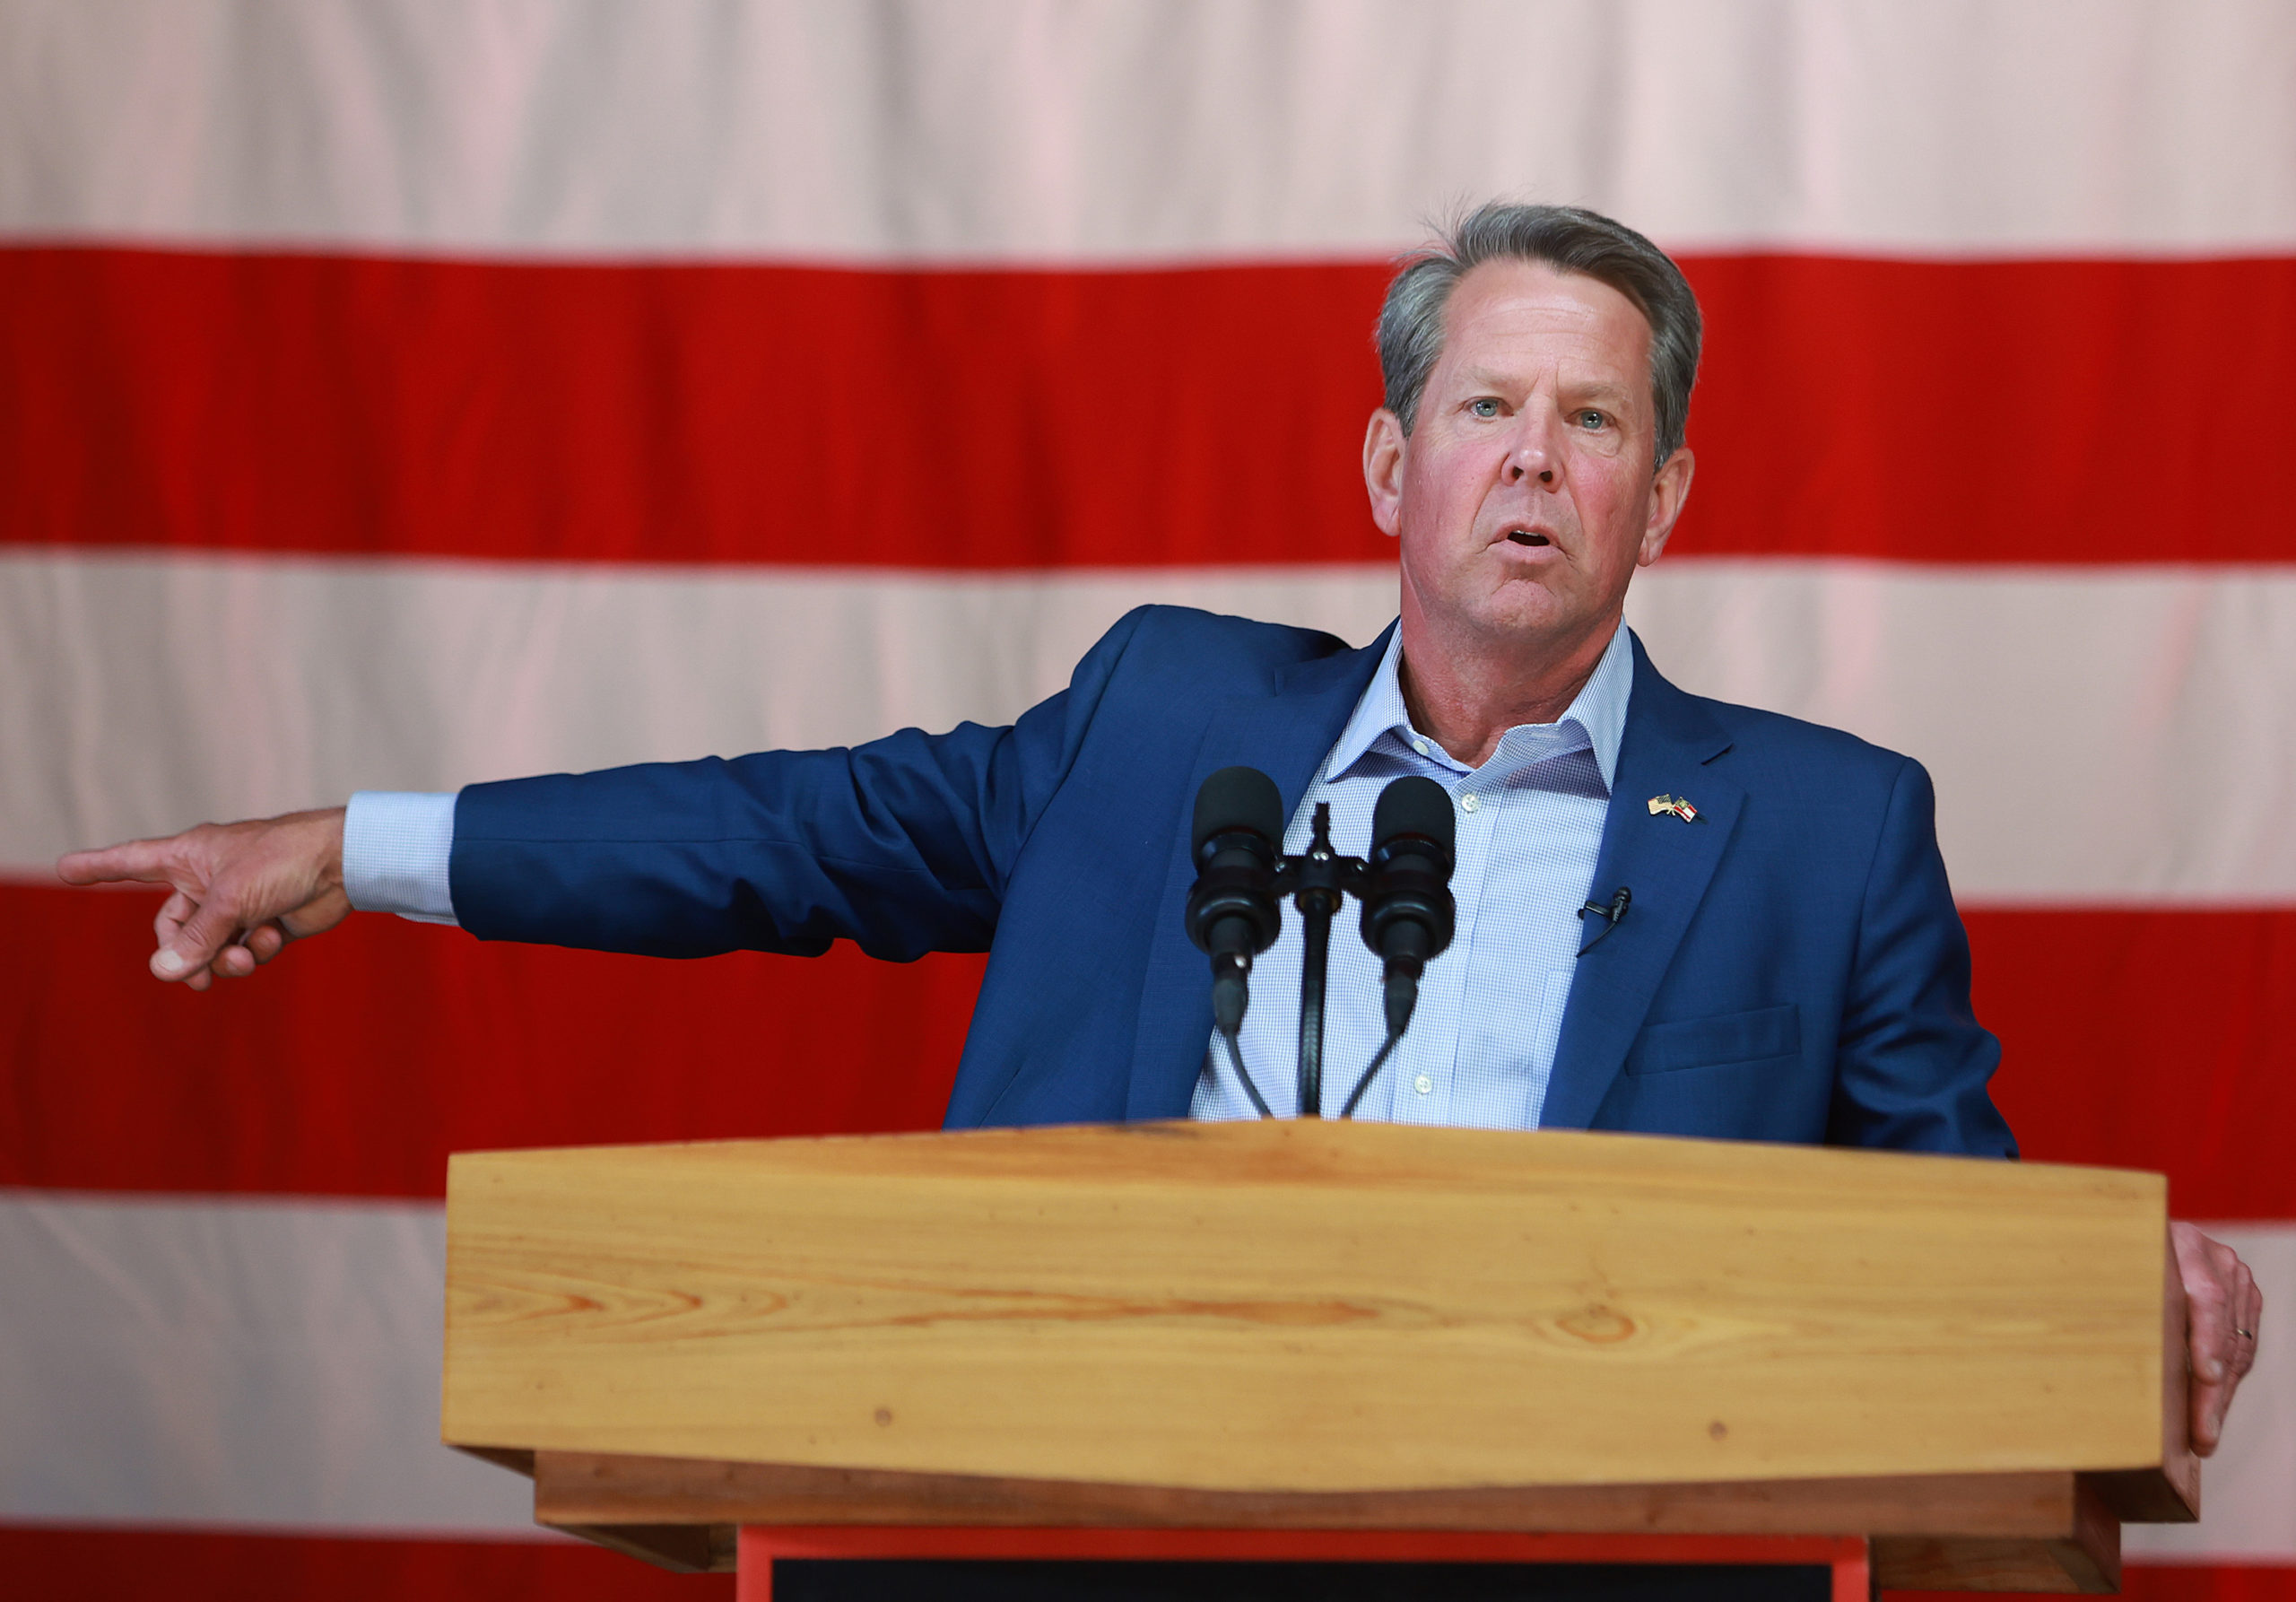 Georgia Gov. Brian Kemp speaks at a campaign event attended by former U.S. Vice President Mike Pence at the Cobb County International Airport on May 23, 2022 in Kennesaw, Georgia. (Photo by Joe Raedle/Getty Images)